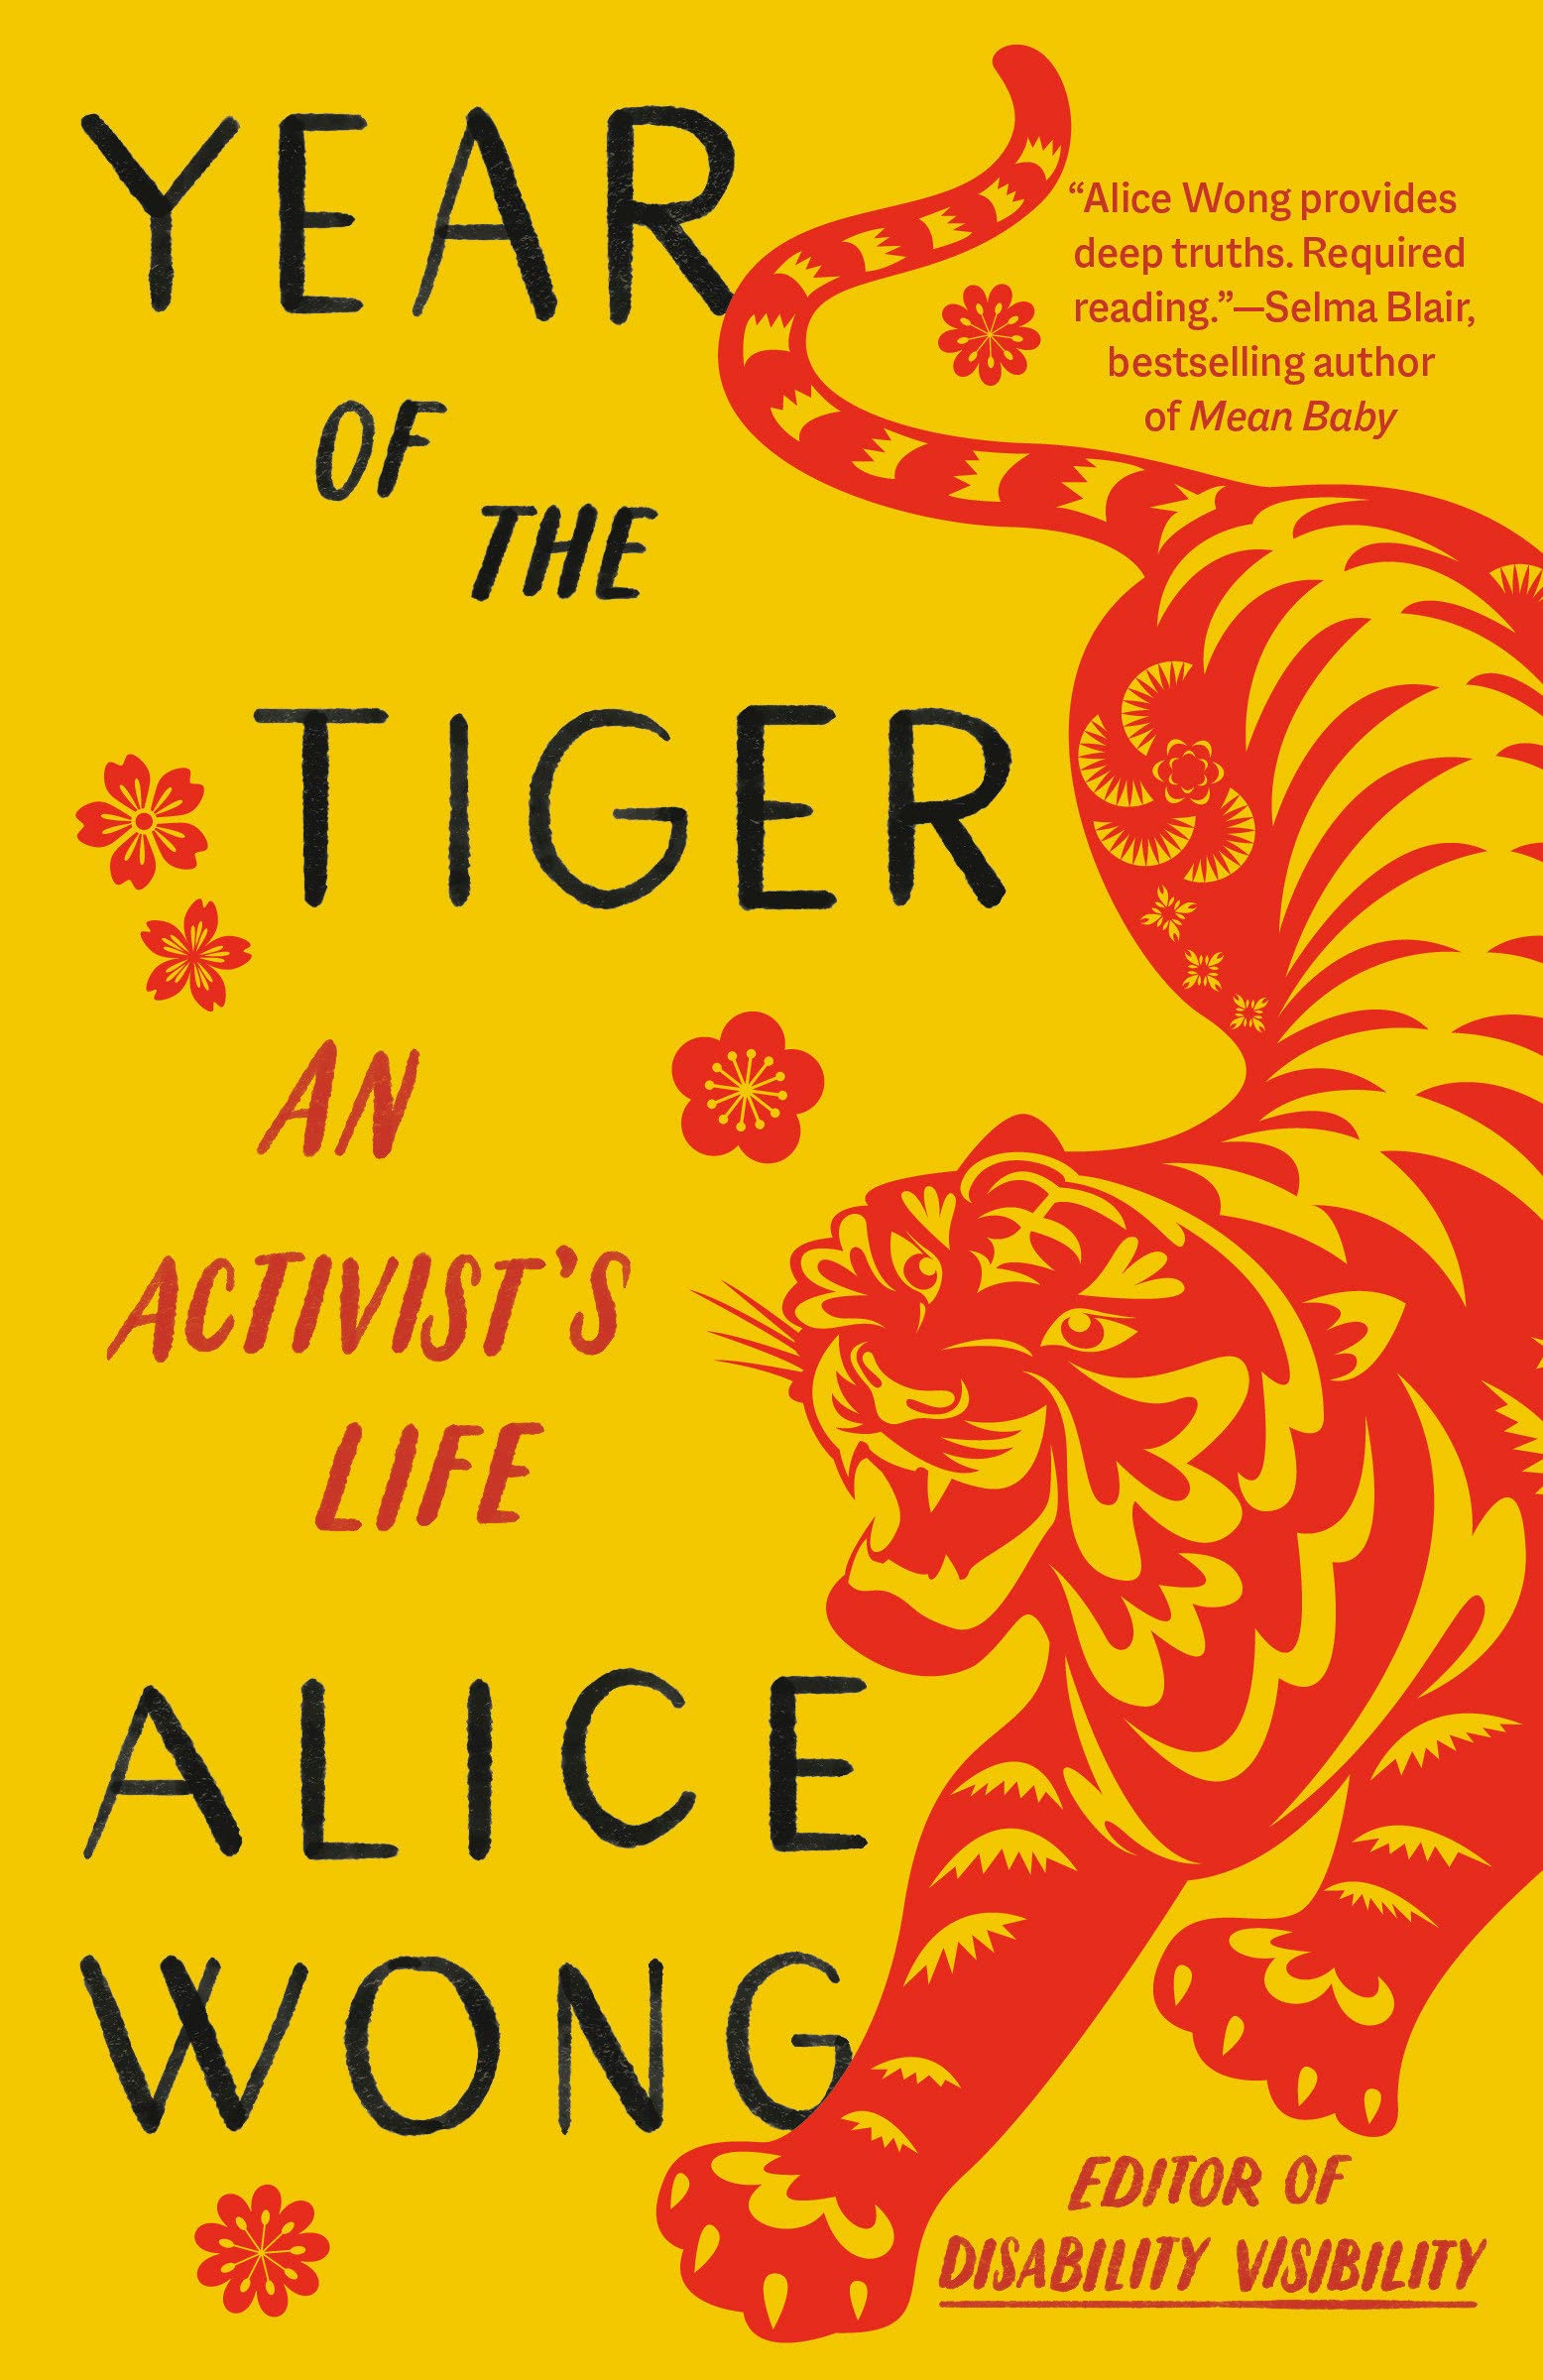 Book cover for Year of the Tiger by Alice Wong featuring an illustration of a red Asian-influenced tiger surrounded by flowers, on a yellow background